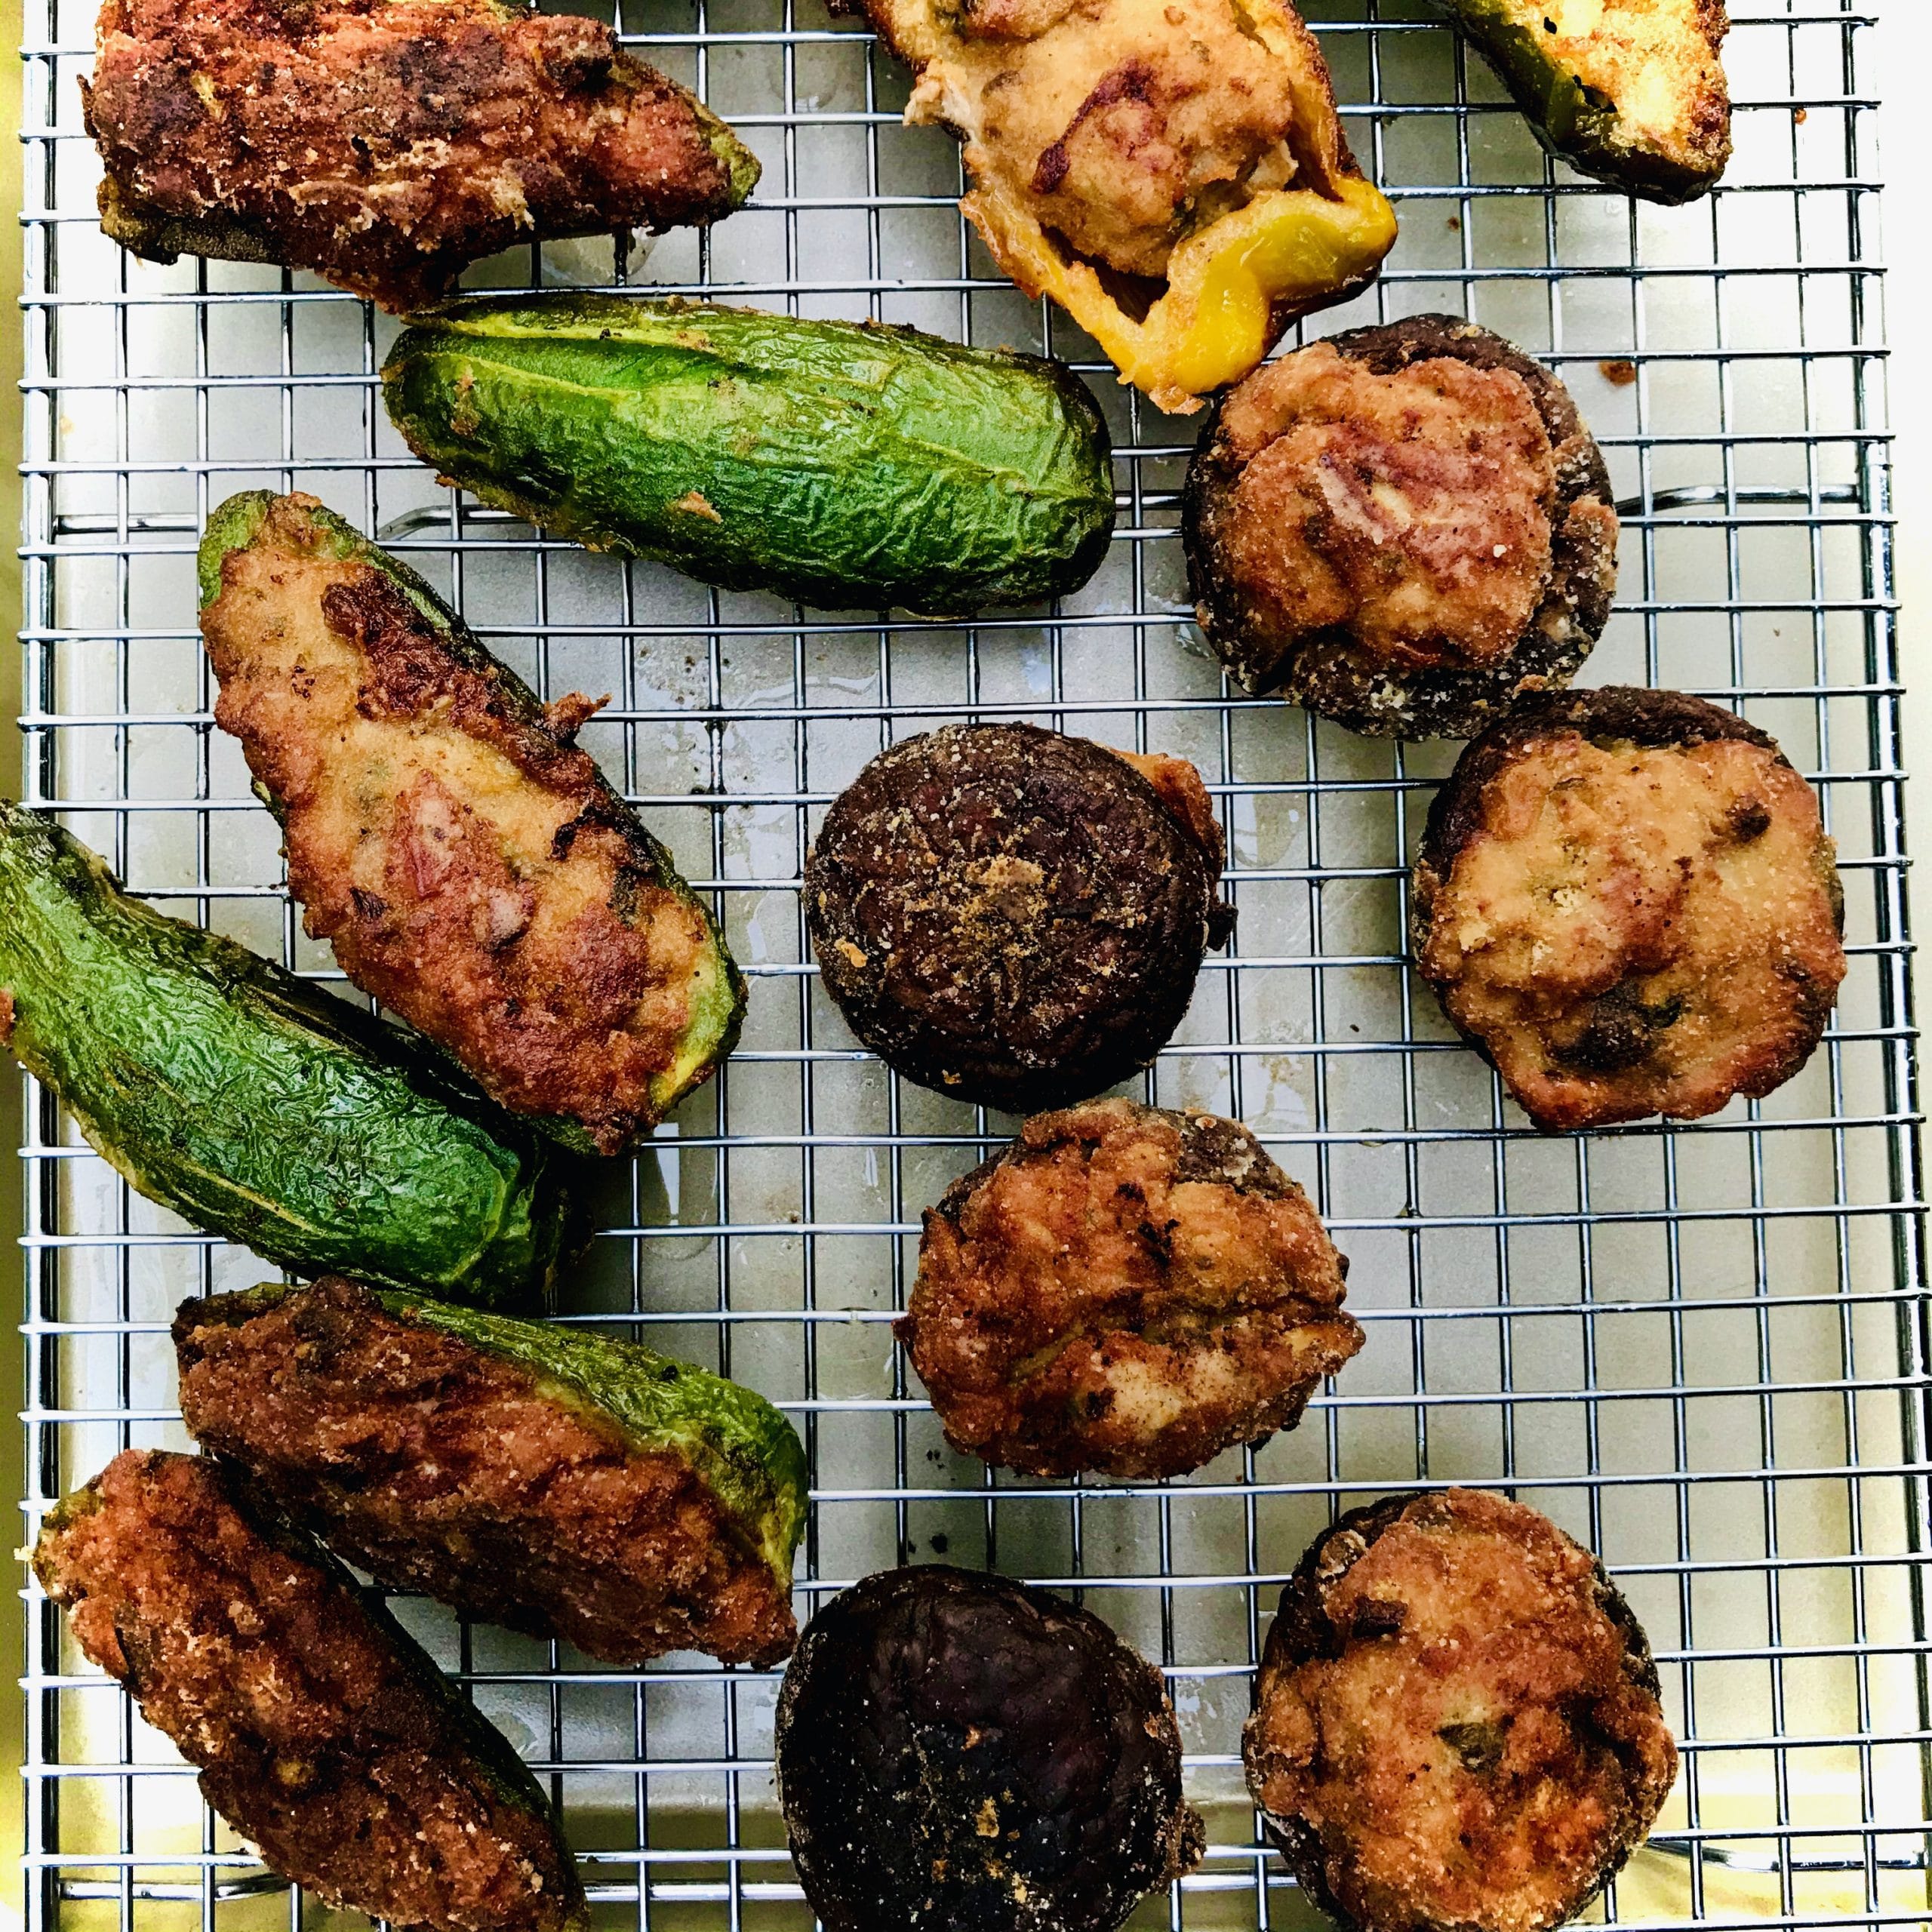 jalapeño peppers and shiitake mushrooms are stuffed with savory turkey potsticker filling, then deep fried until brown and crispy